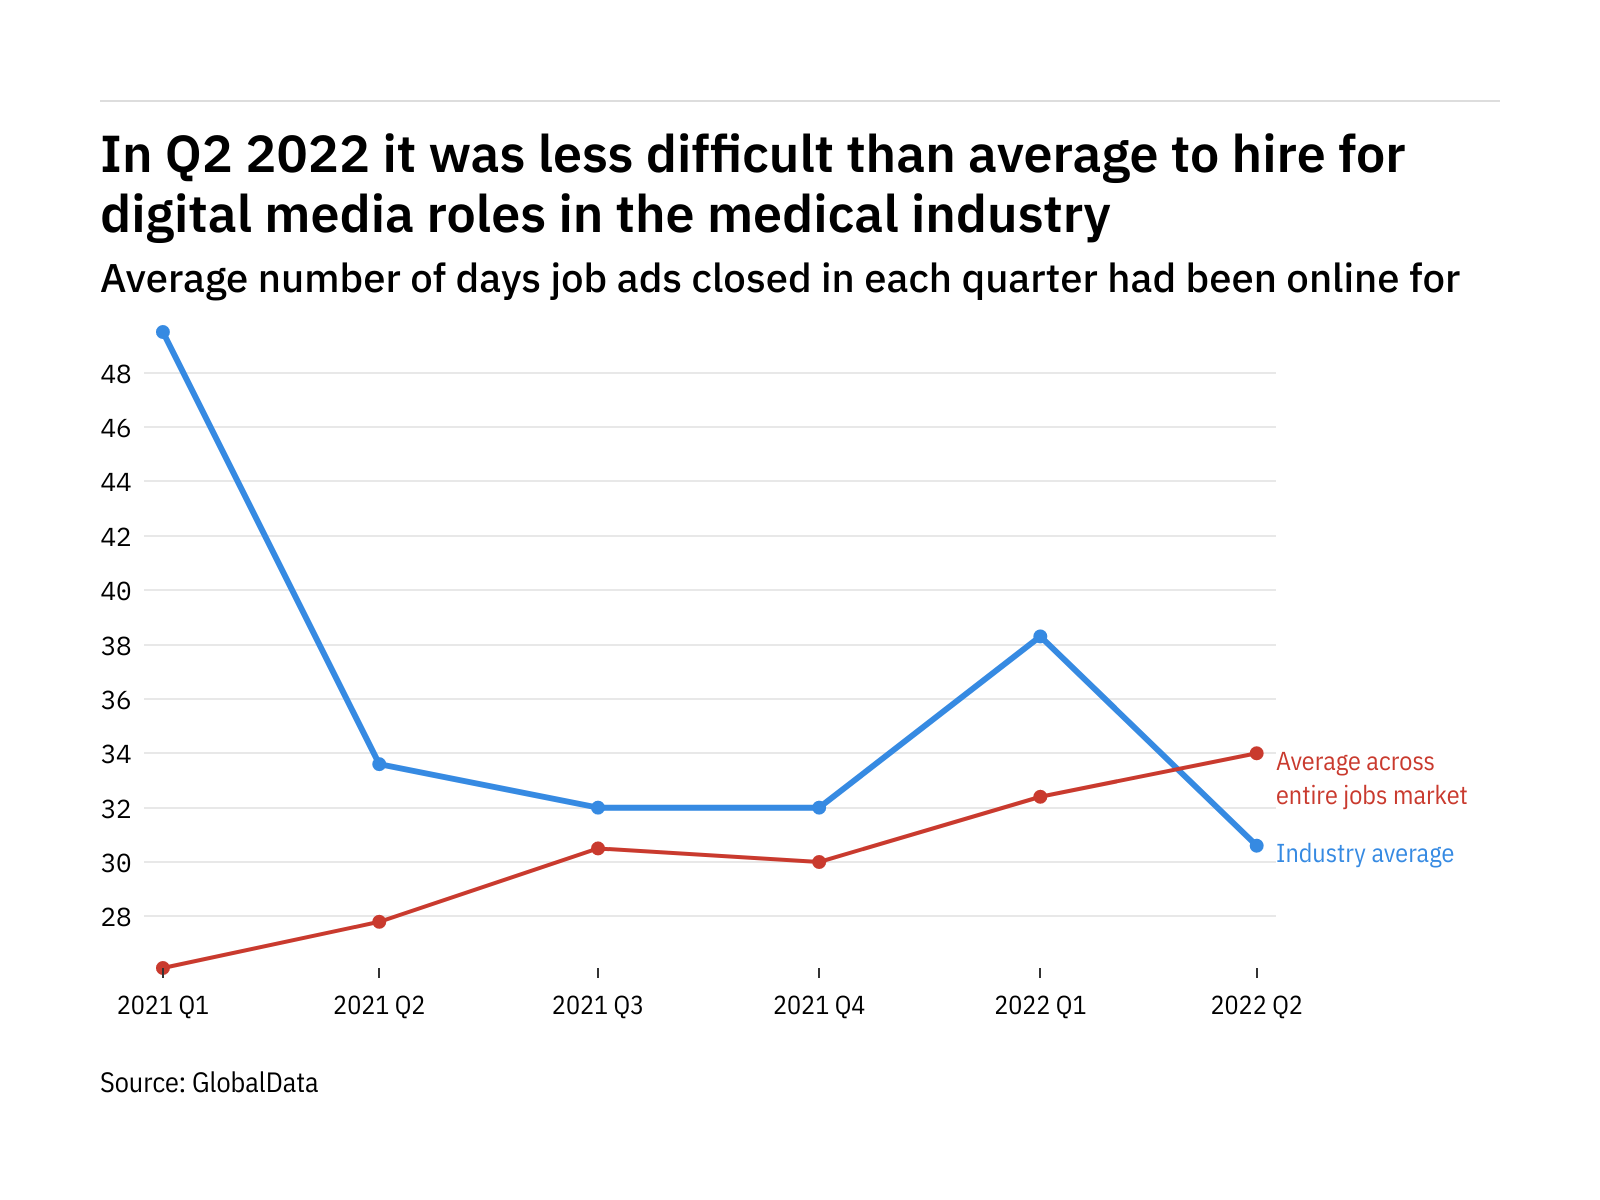 The medical industry found it easier to fill digital media vacancies in Q2 2022